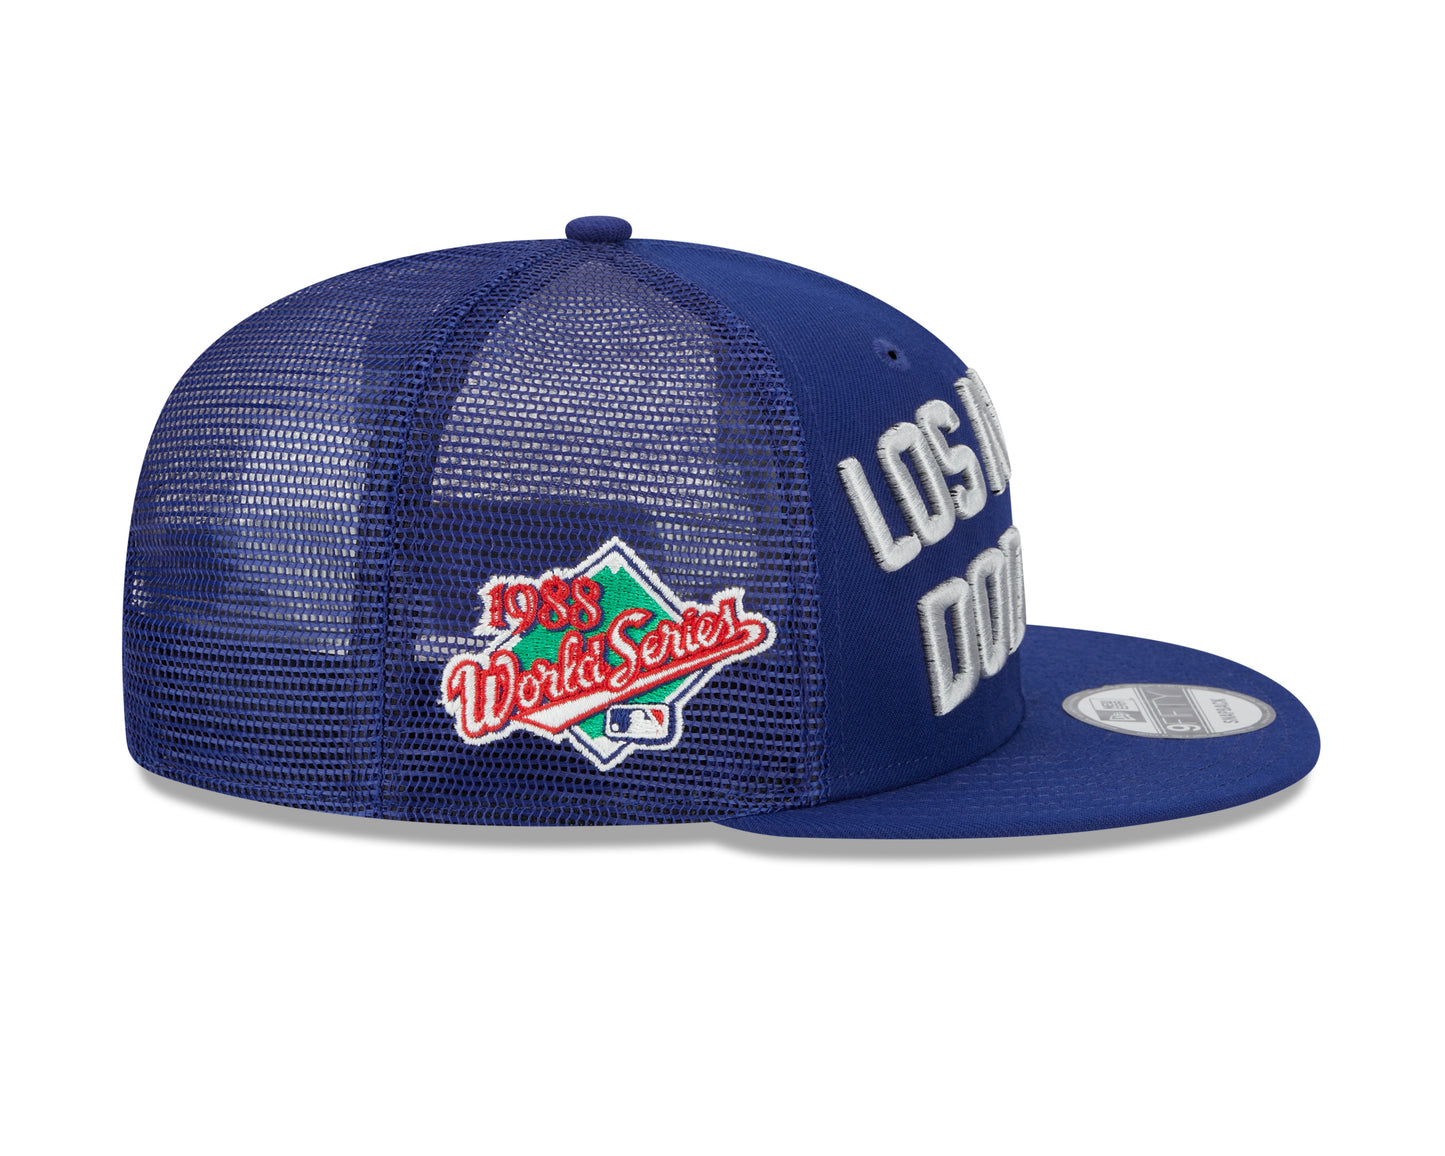 Los Angeles Dodgers New Era Blue Stacked 9FIFTY Mesh Trucker Snapback Hat